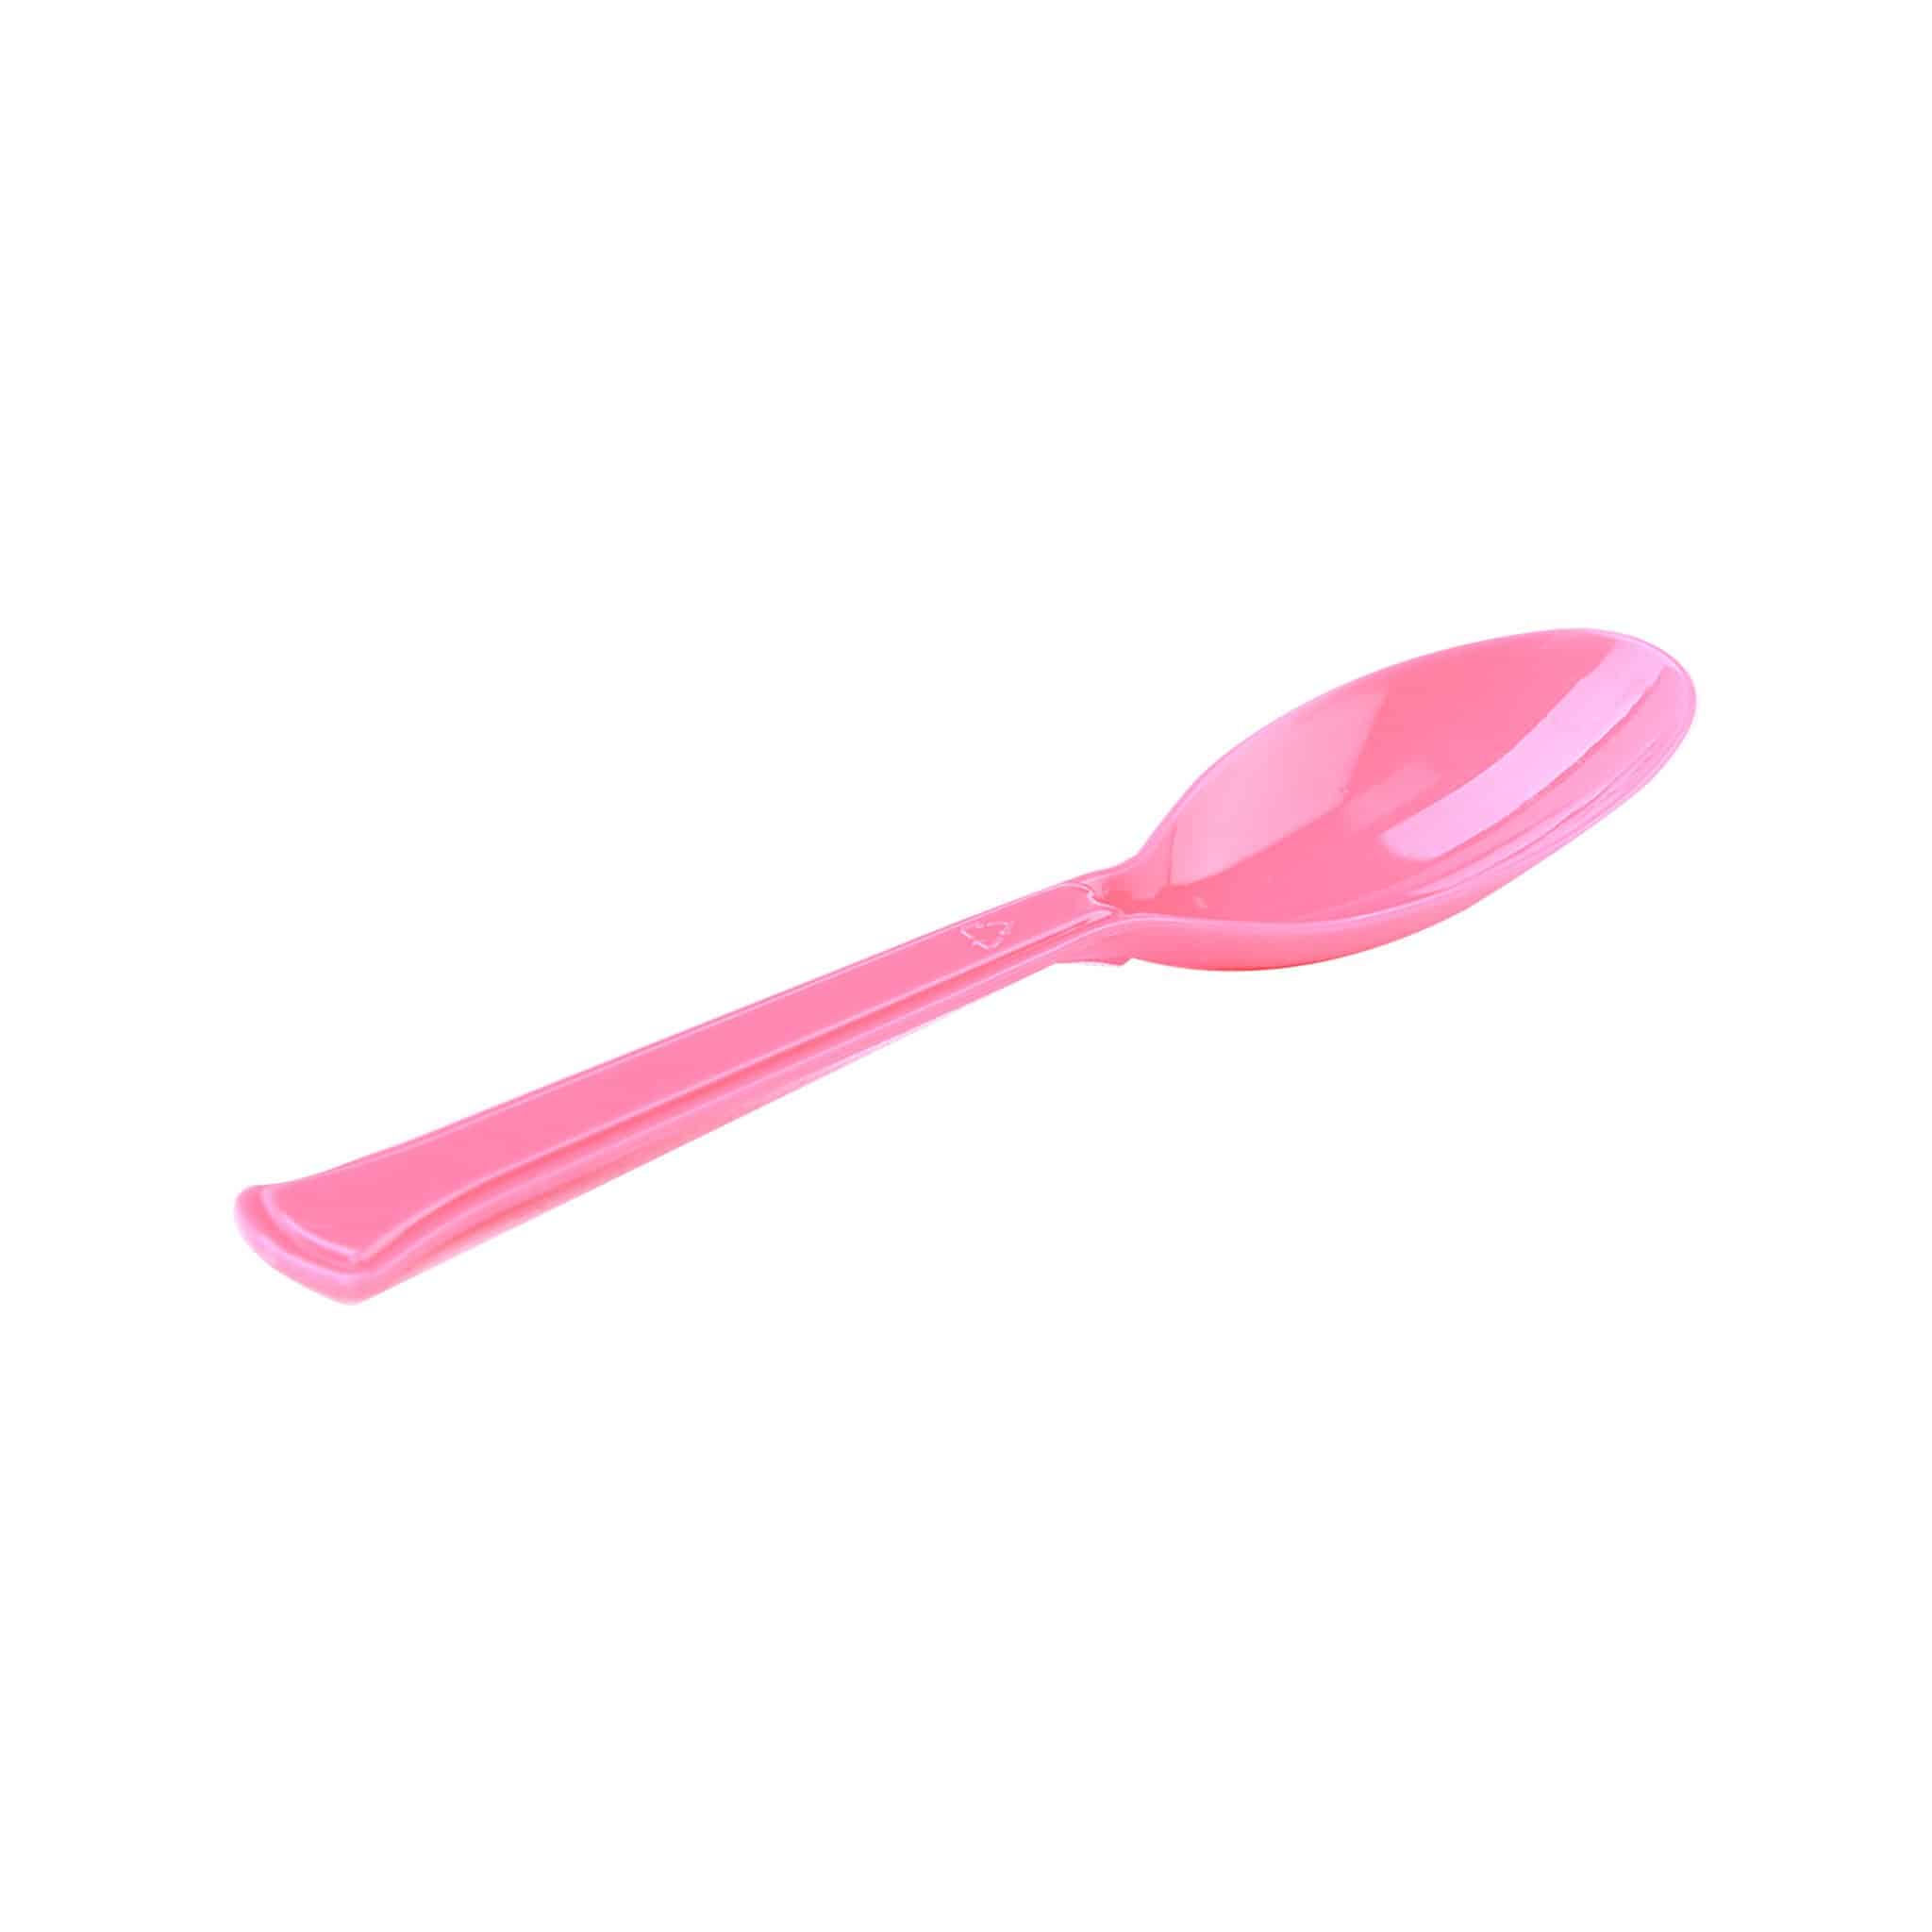 Hotpack | Plastic Ice Cream Spoon Pink Color 11.5cm Large | 2500 Pieces - Hotpack Global